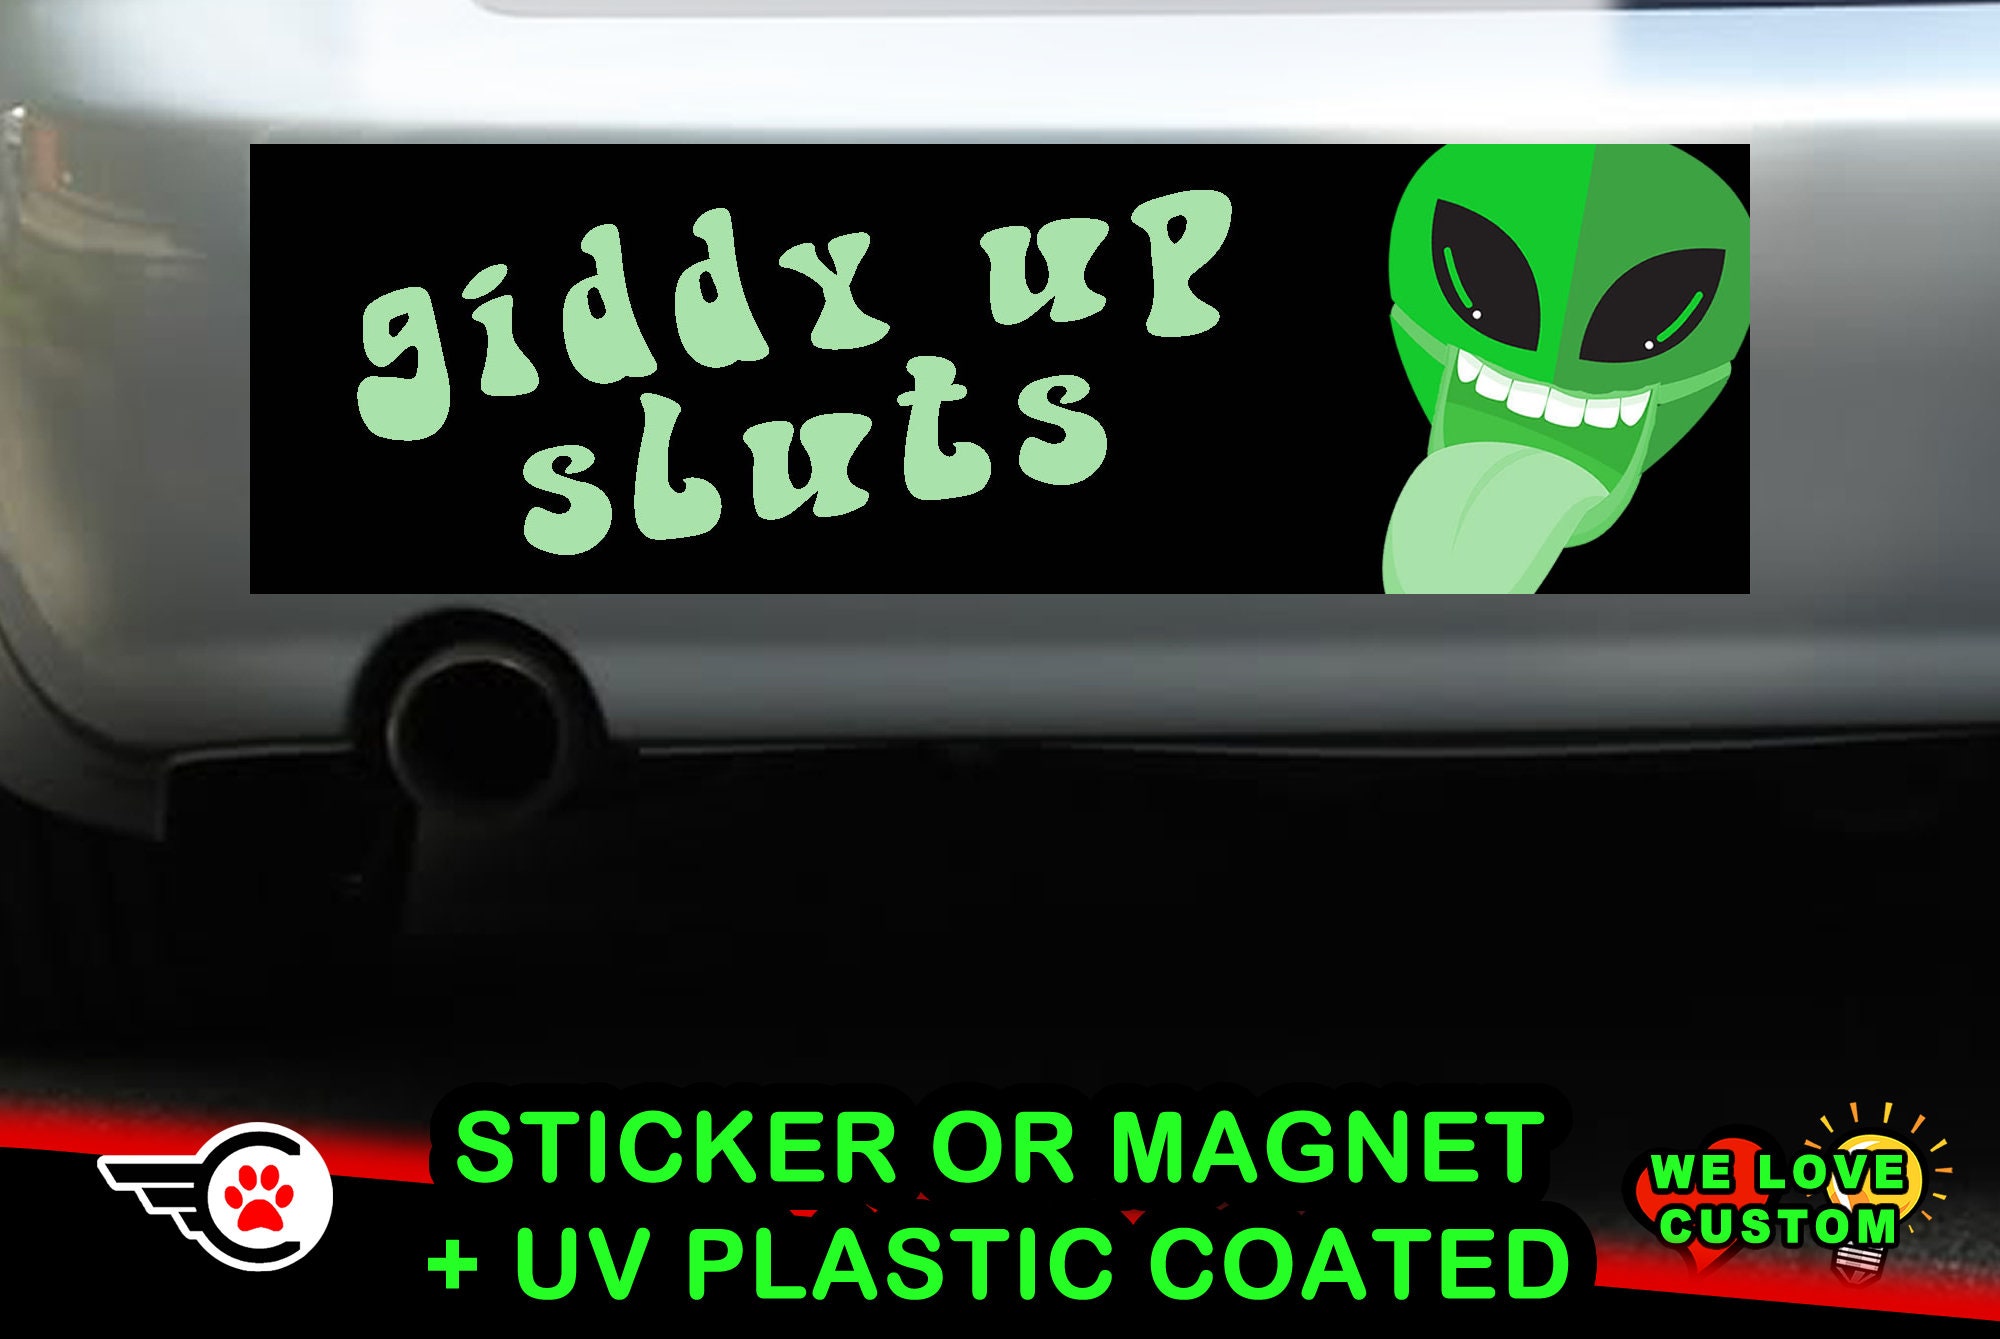 Giddy Up Sluts Funny Bumper Sticker or Magnet in new sizes, 4